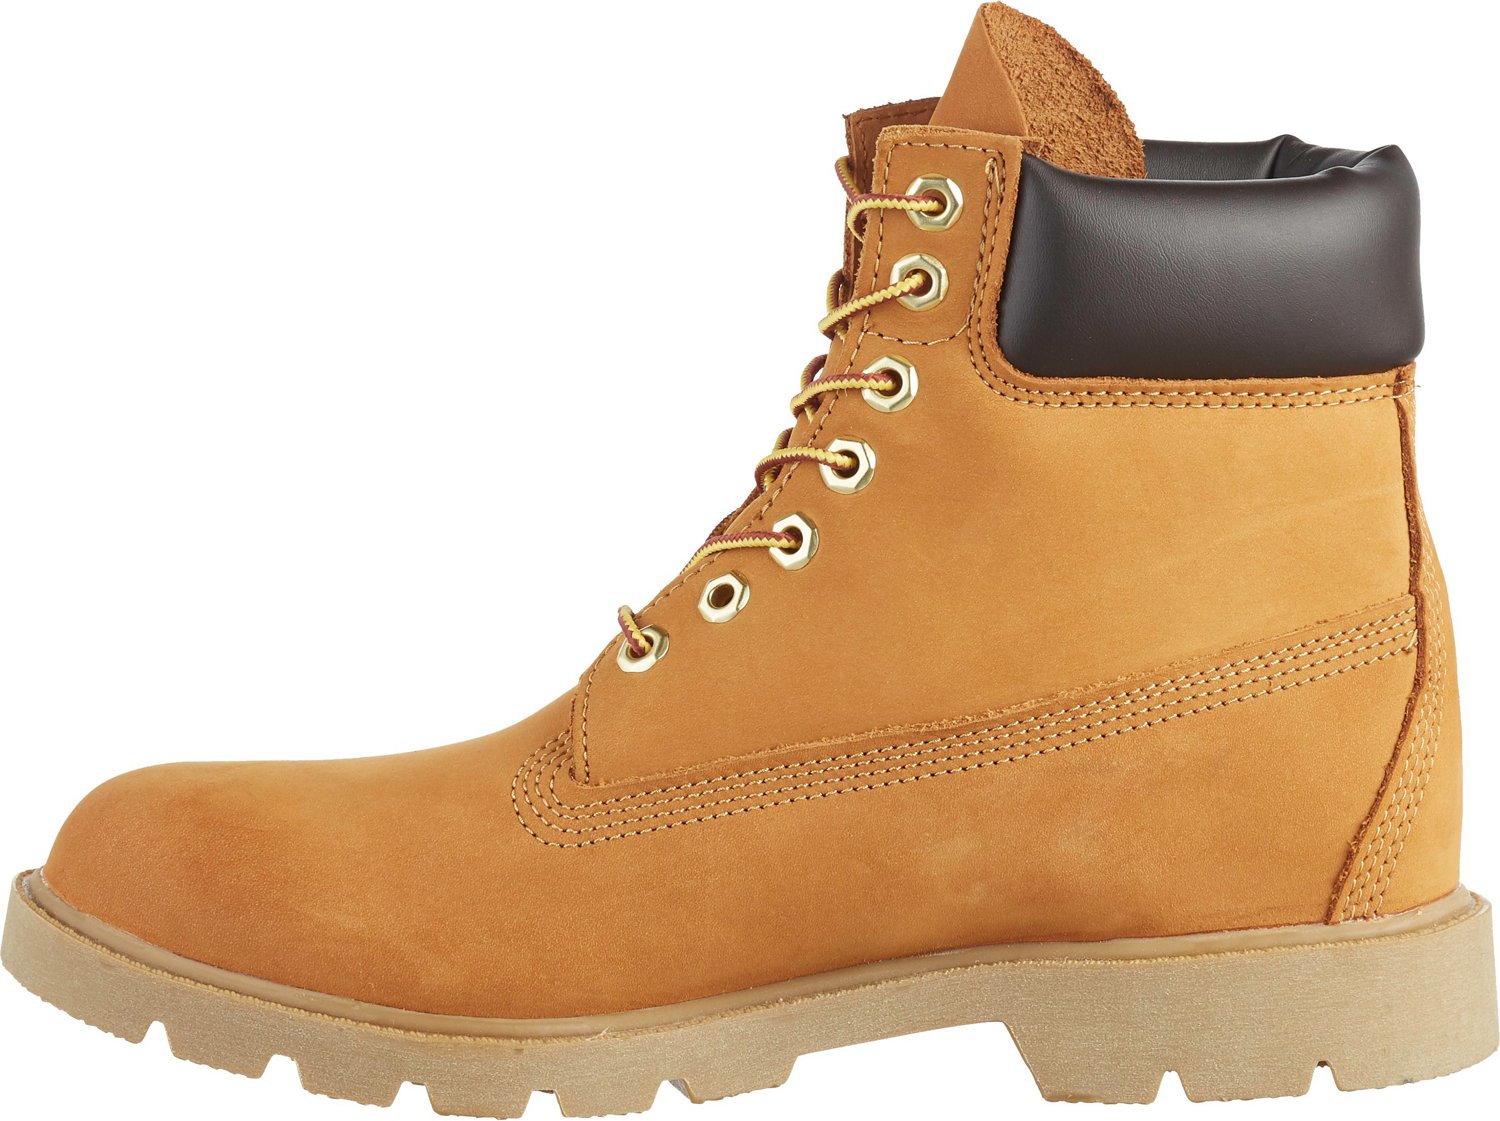 Timberland Men's Classic 6 inch Boots | Academy